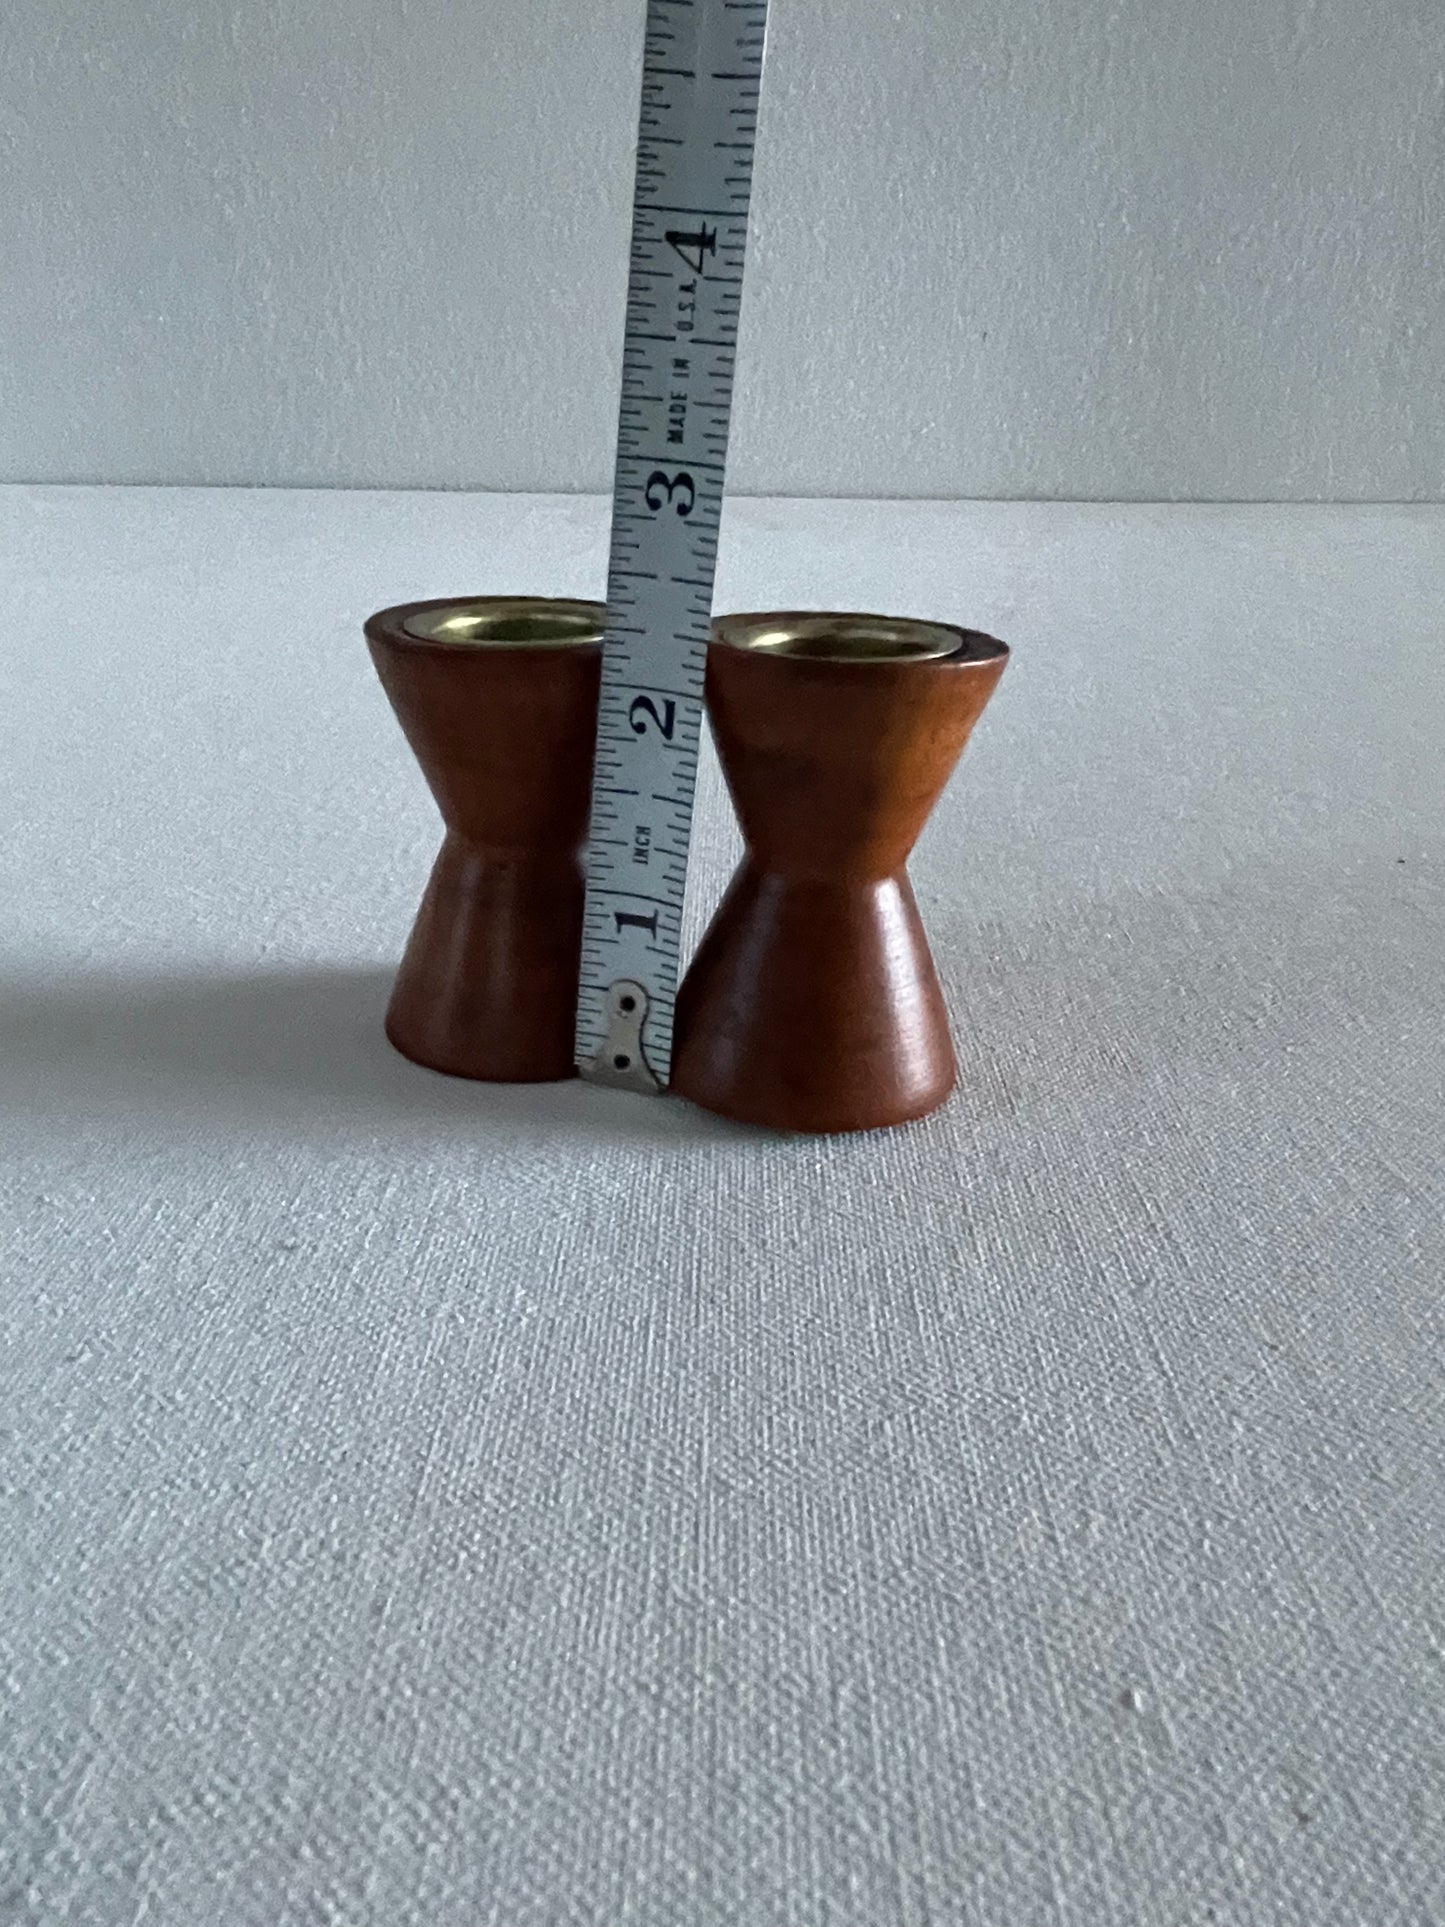 1960s Mid Century Danish Modern Teak Candle Holders Dual Size - a Pair